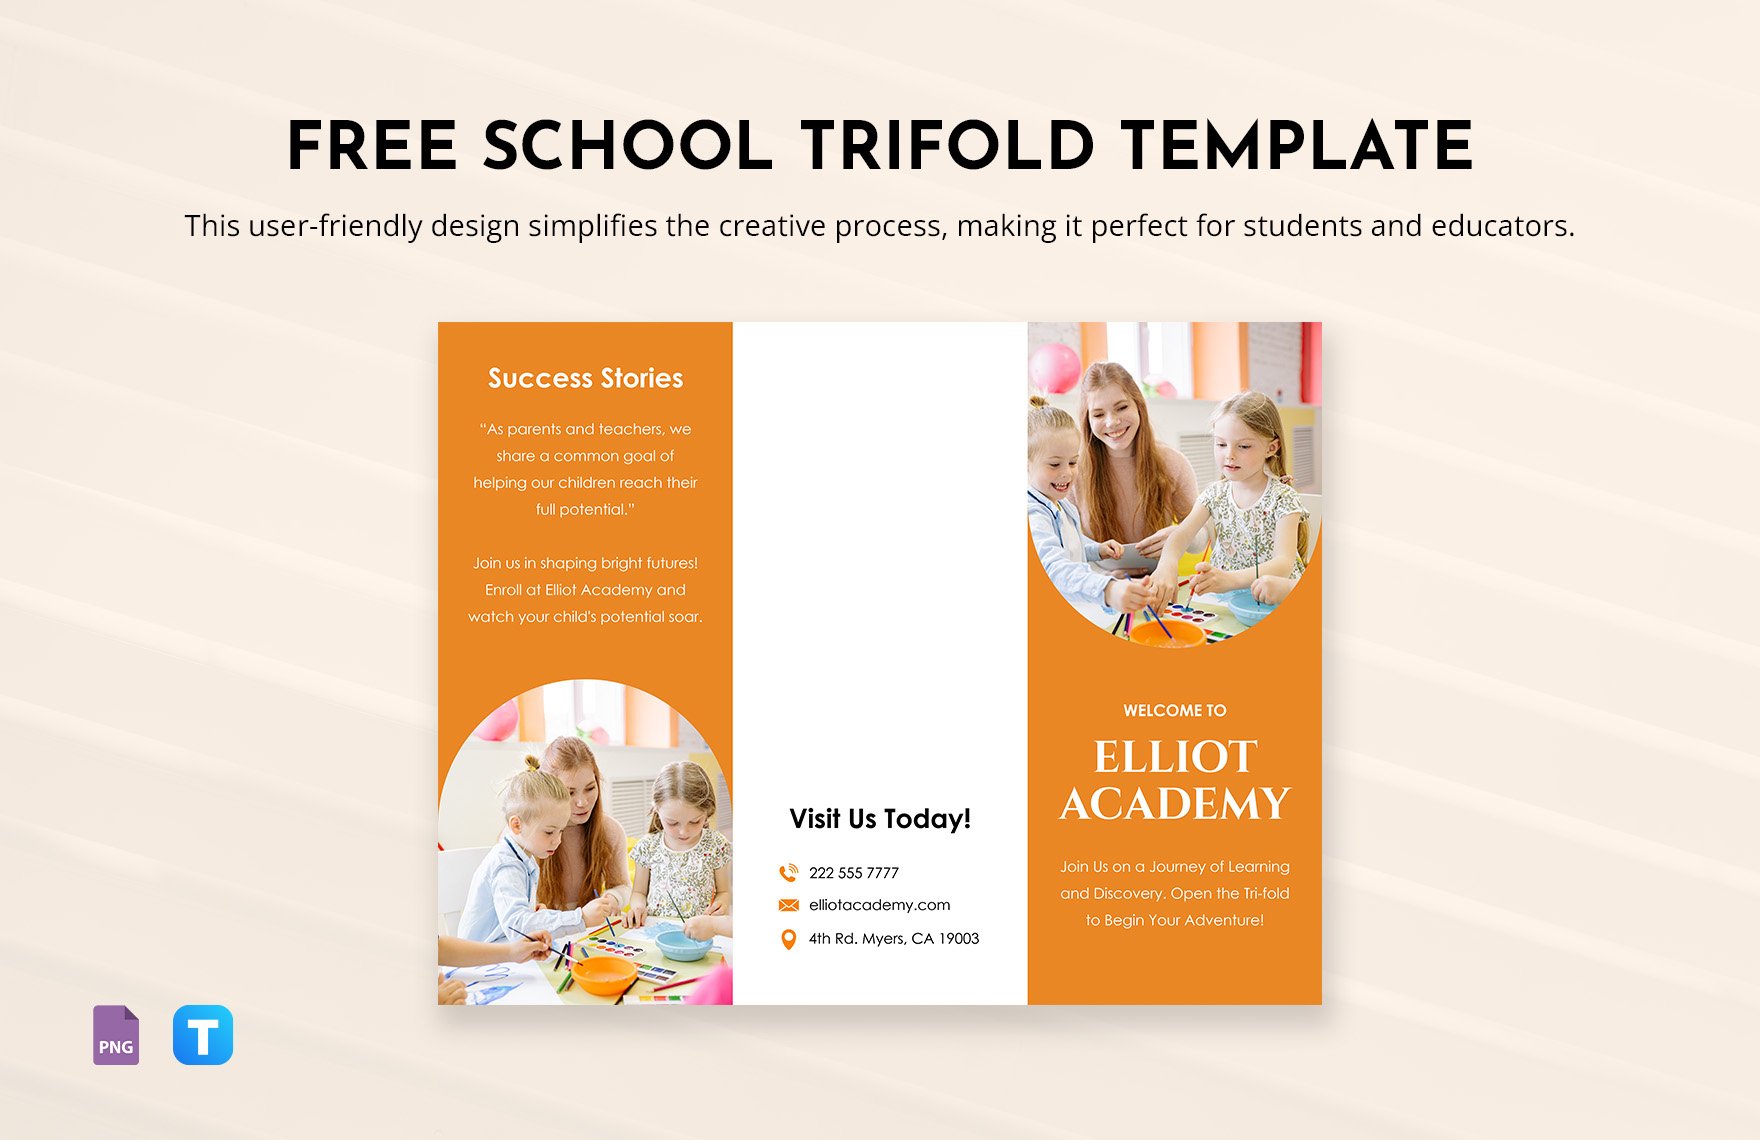 Free School Trifold Template